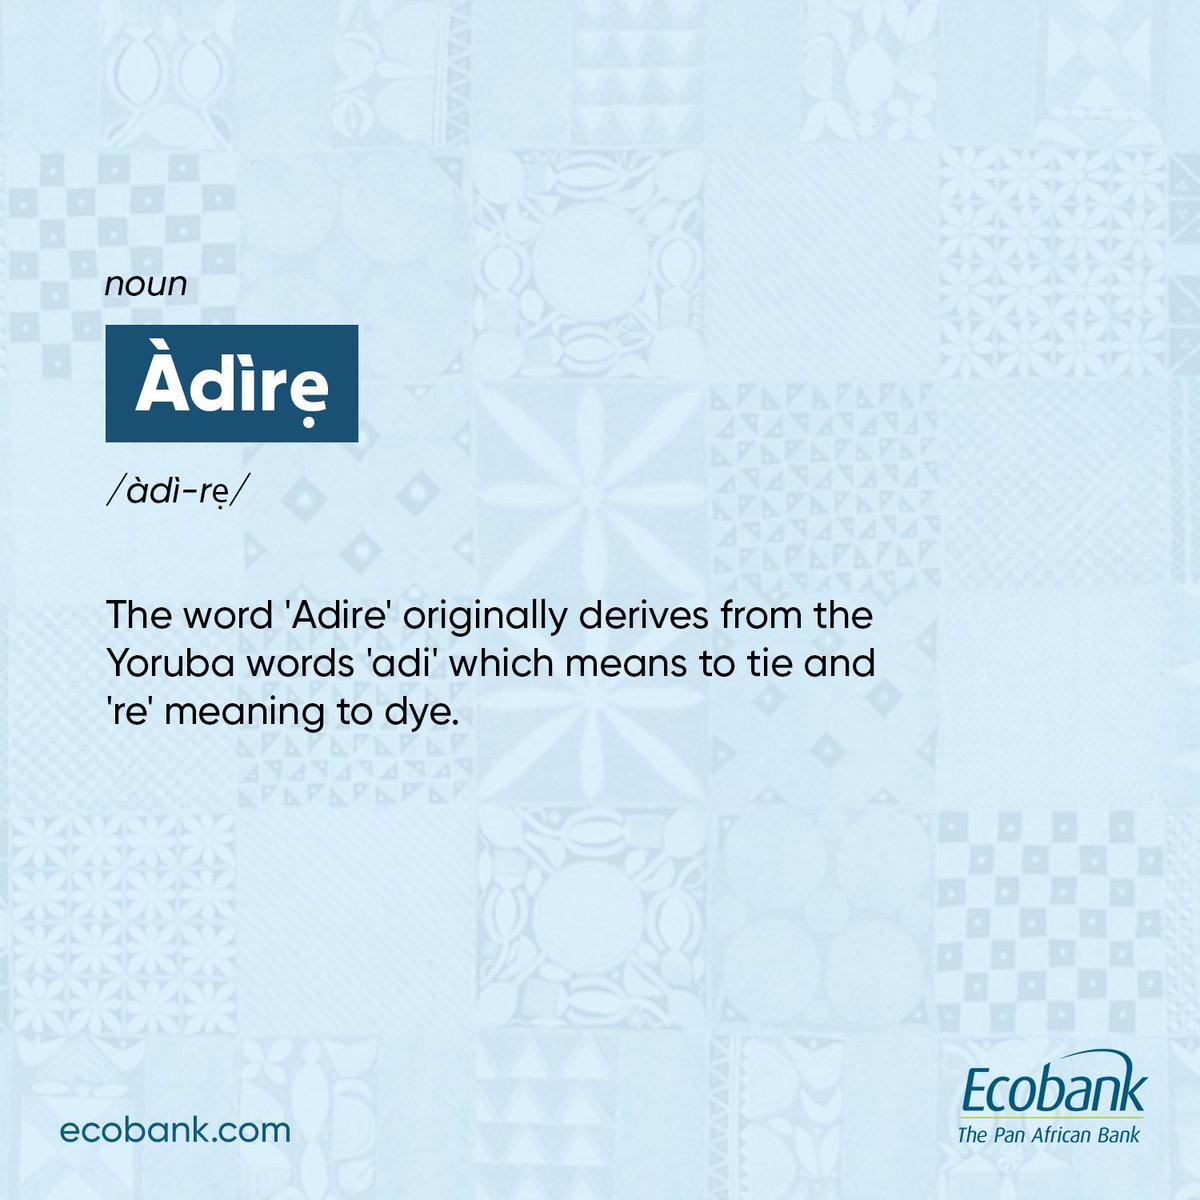 Curious about the meaning of Adire?

#ecobankadirelagos 
#NigerianCreatives
#CulturalExcellence
#abetterway 
#ecobankthepanafricanbank